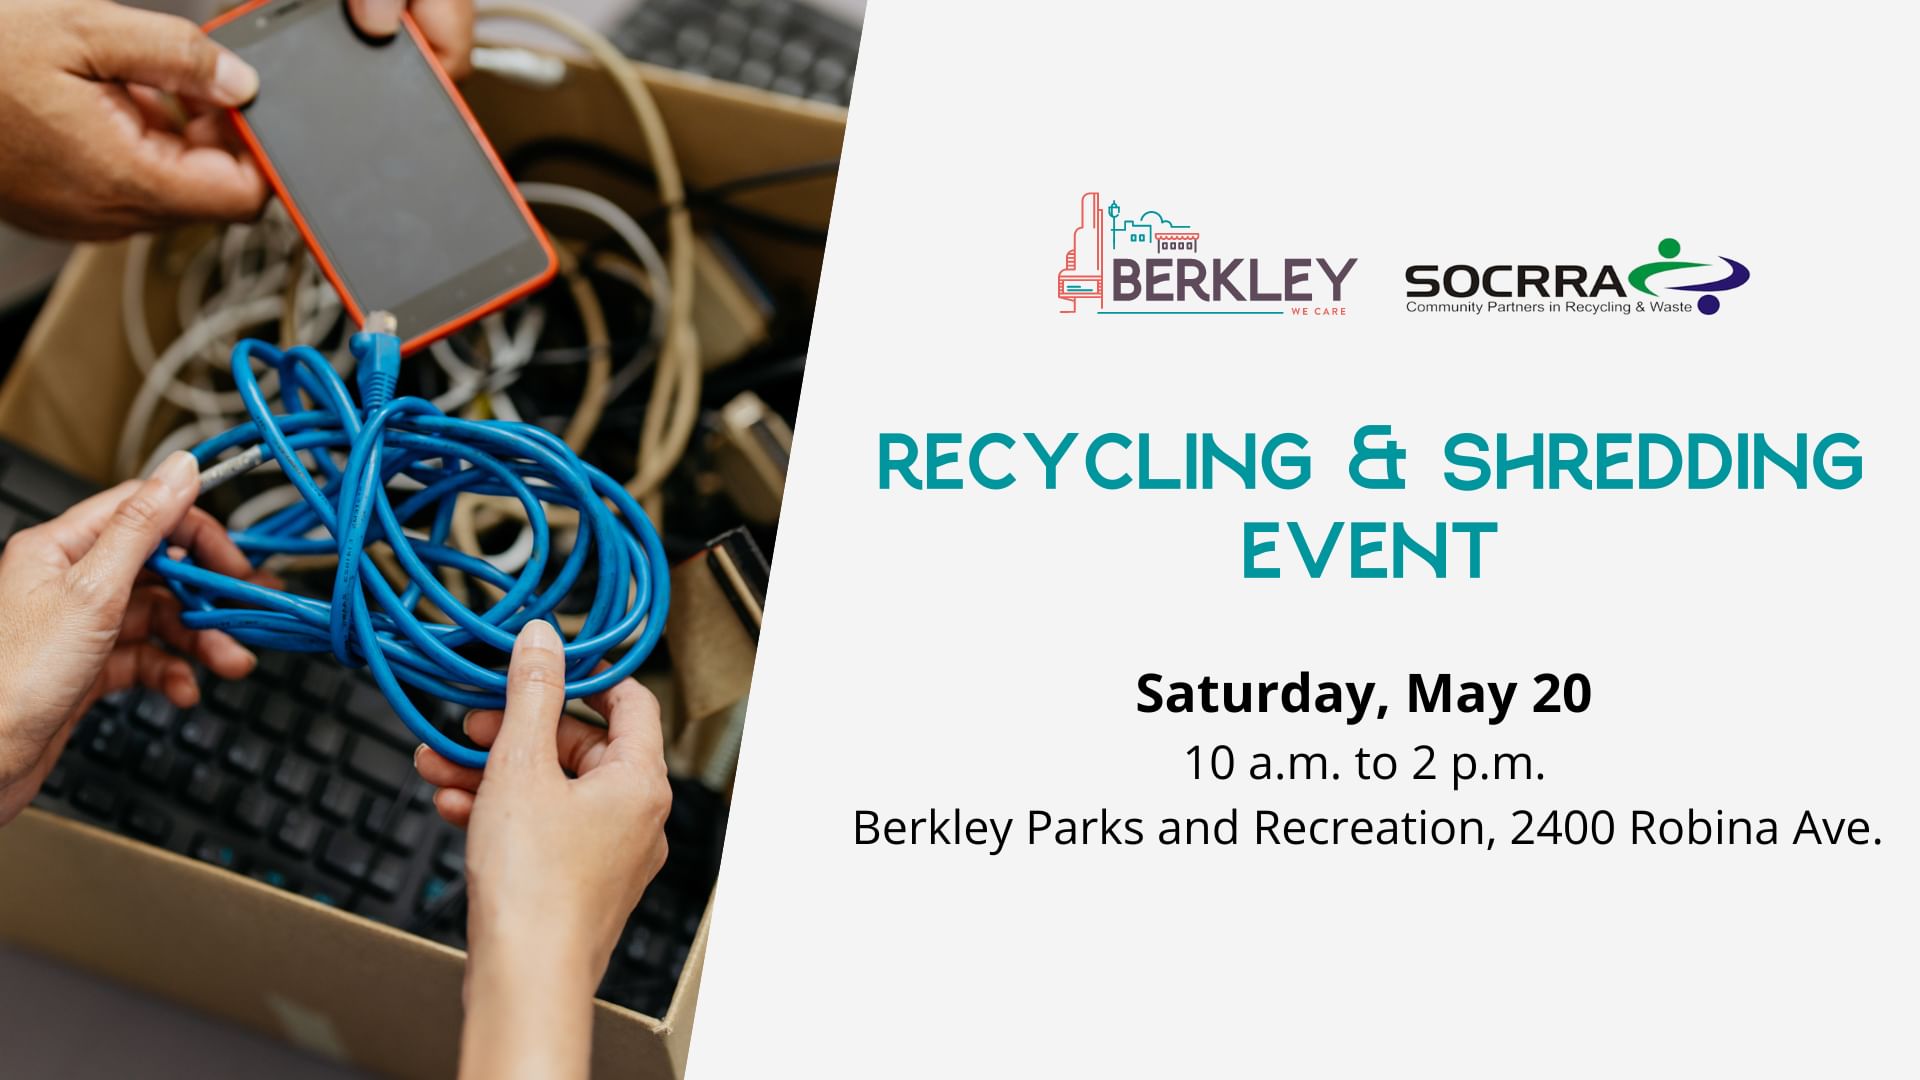 Recycling event image